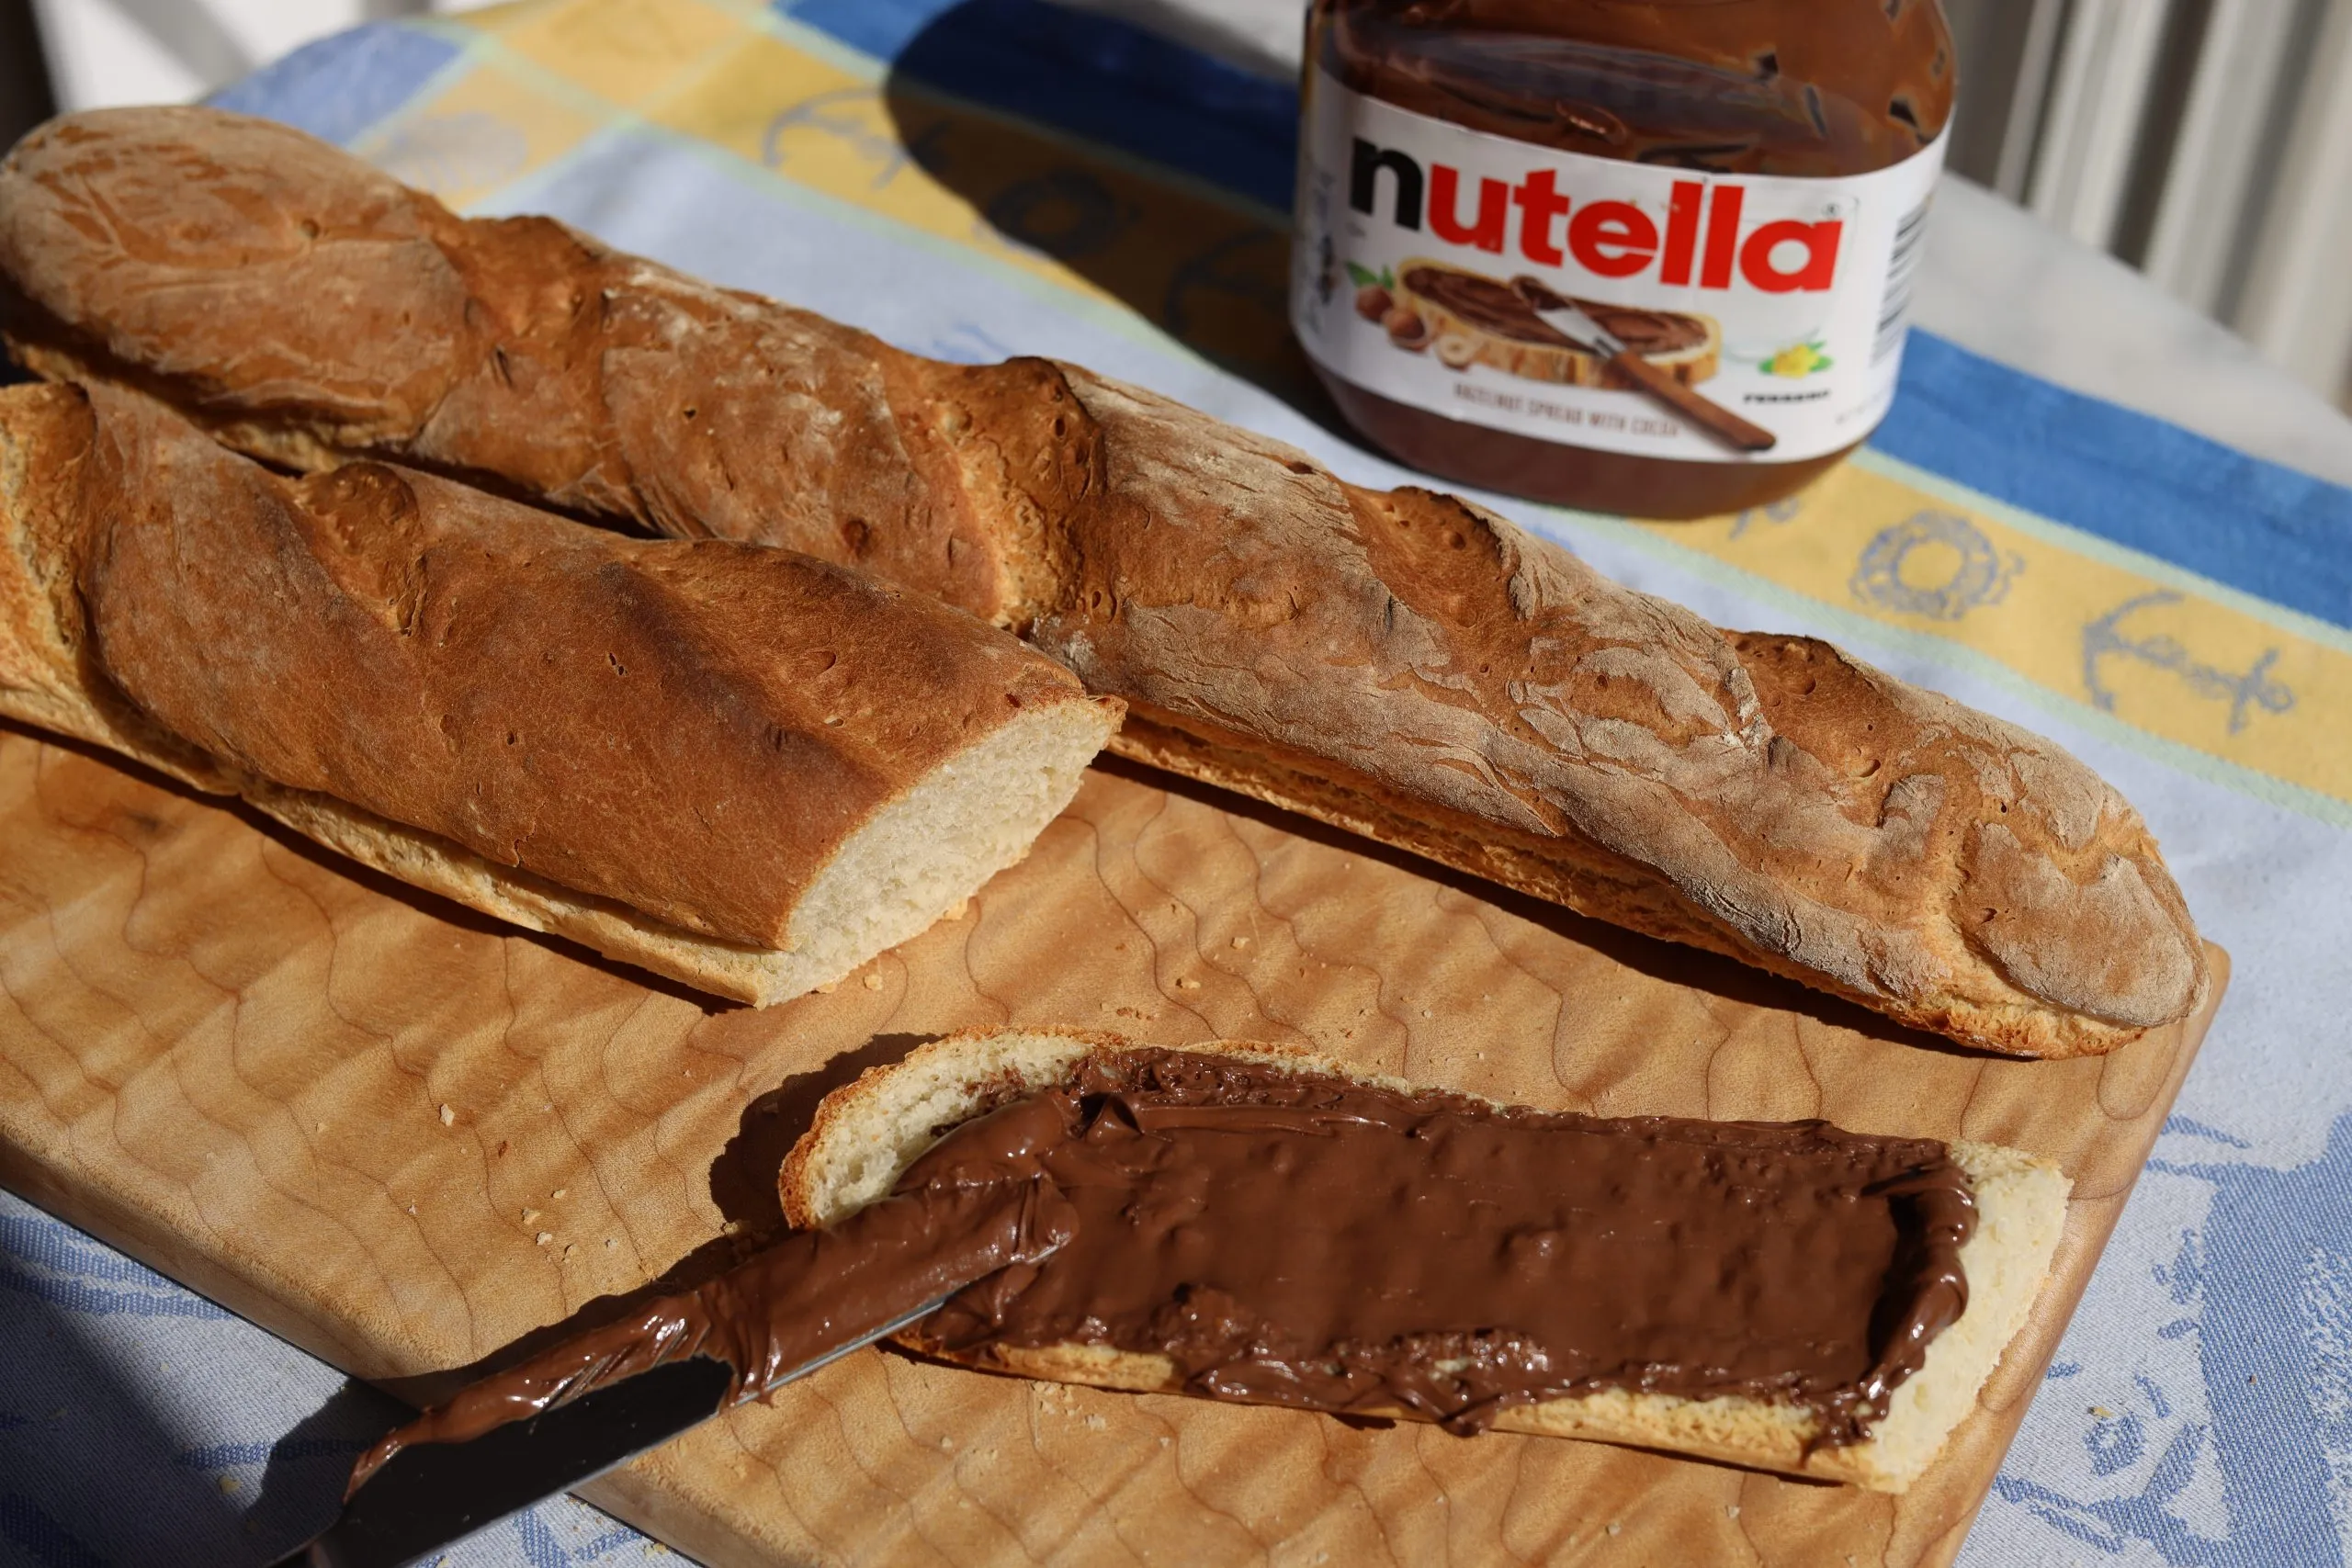 baguette with nutella tartine